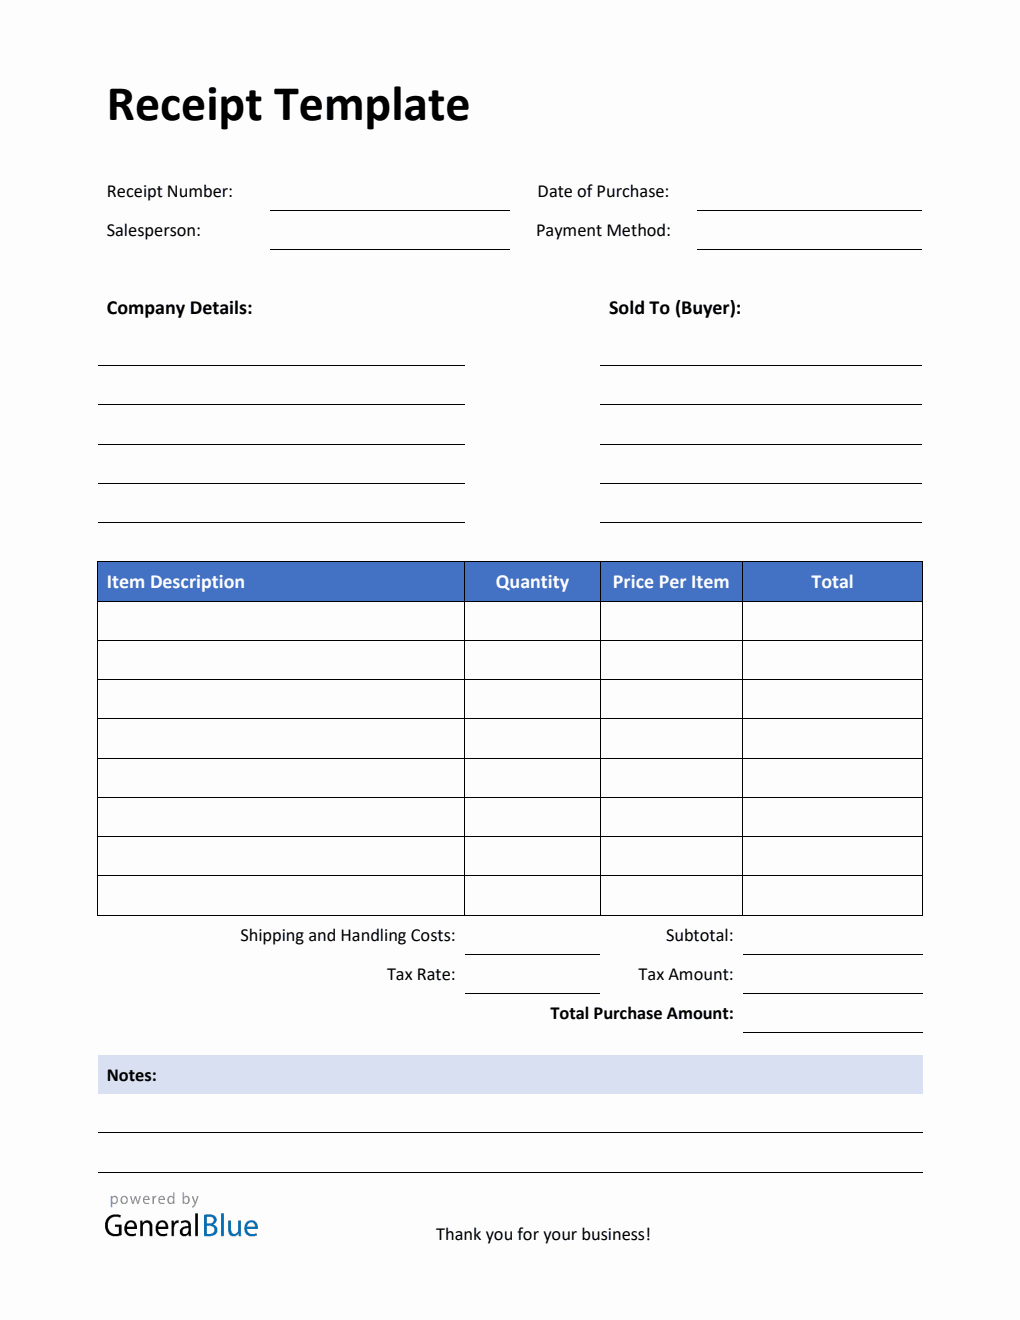 Simple Receipt Template with Notes in PDF